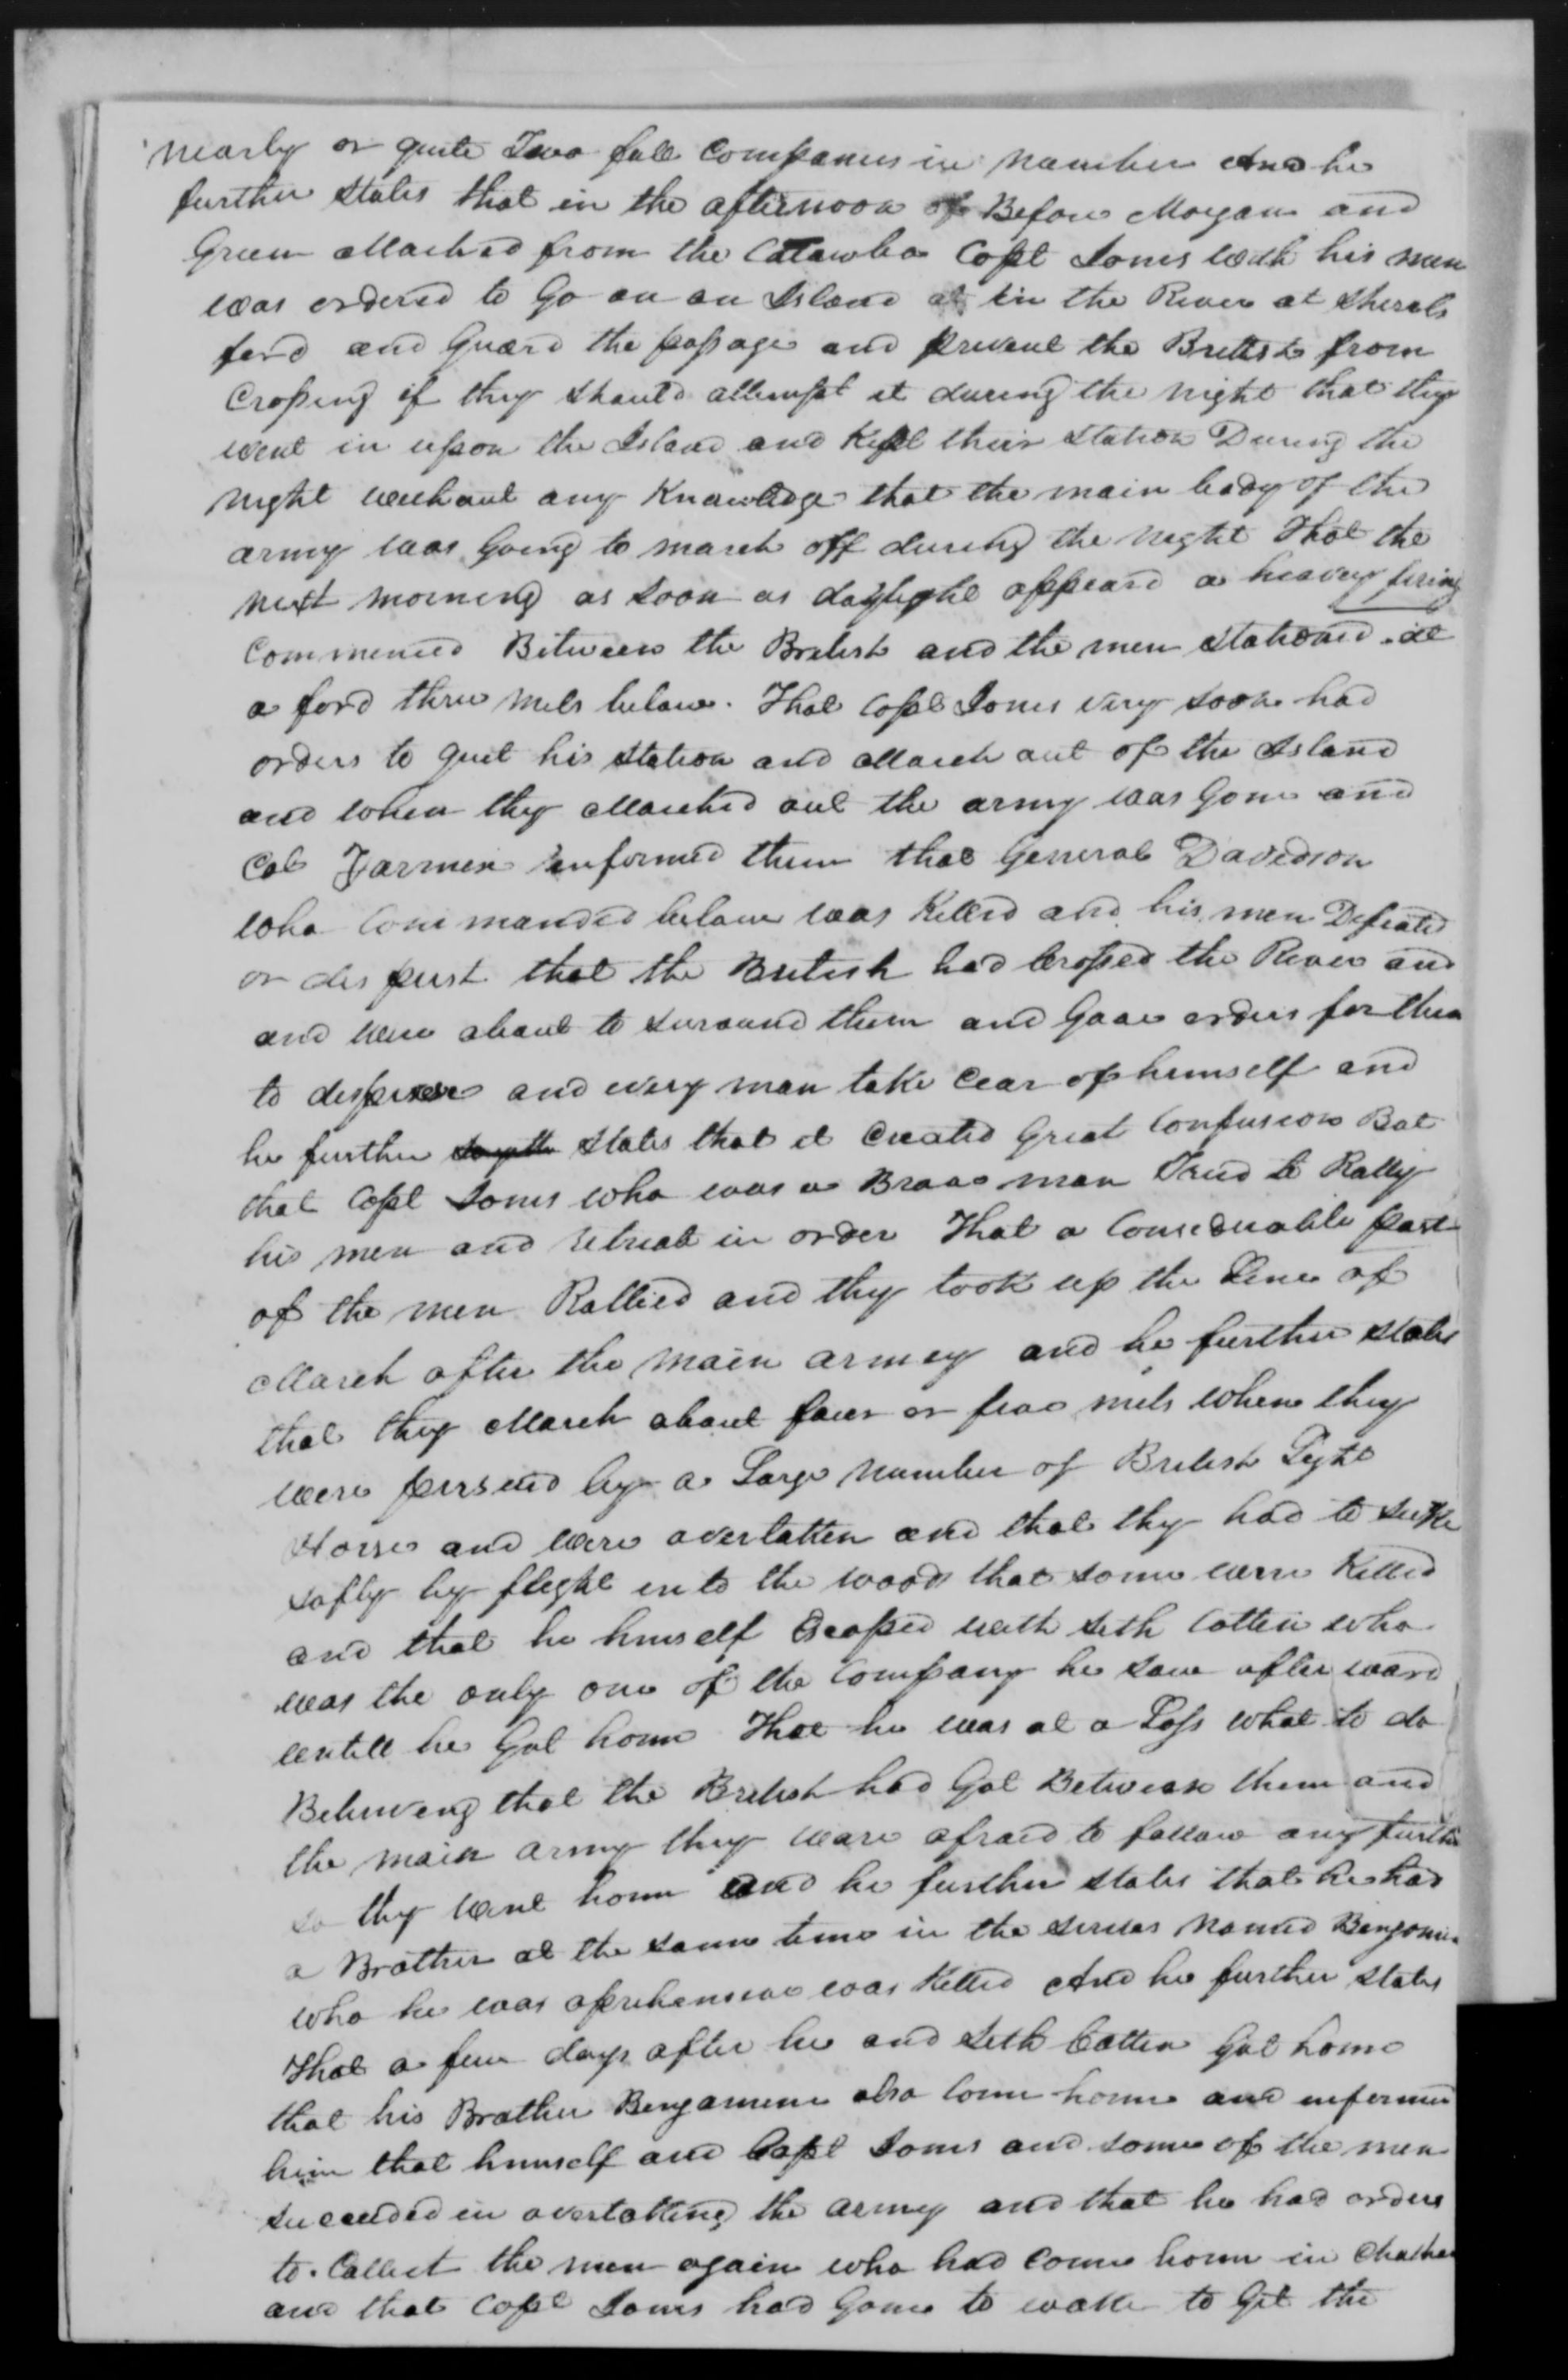 Application for a Veteran's Pension from Nathan Yarborough, 5 August 1833, page 2